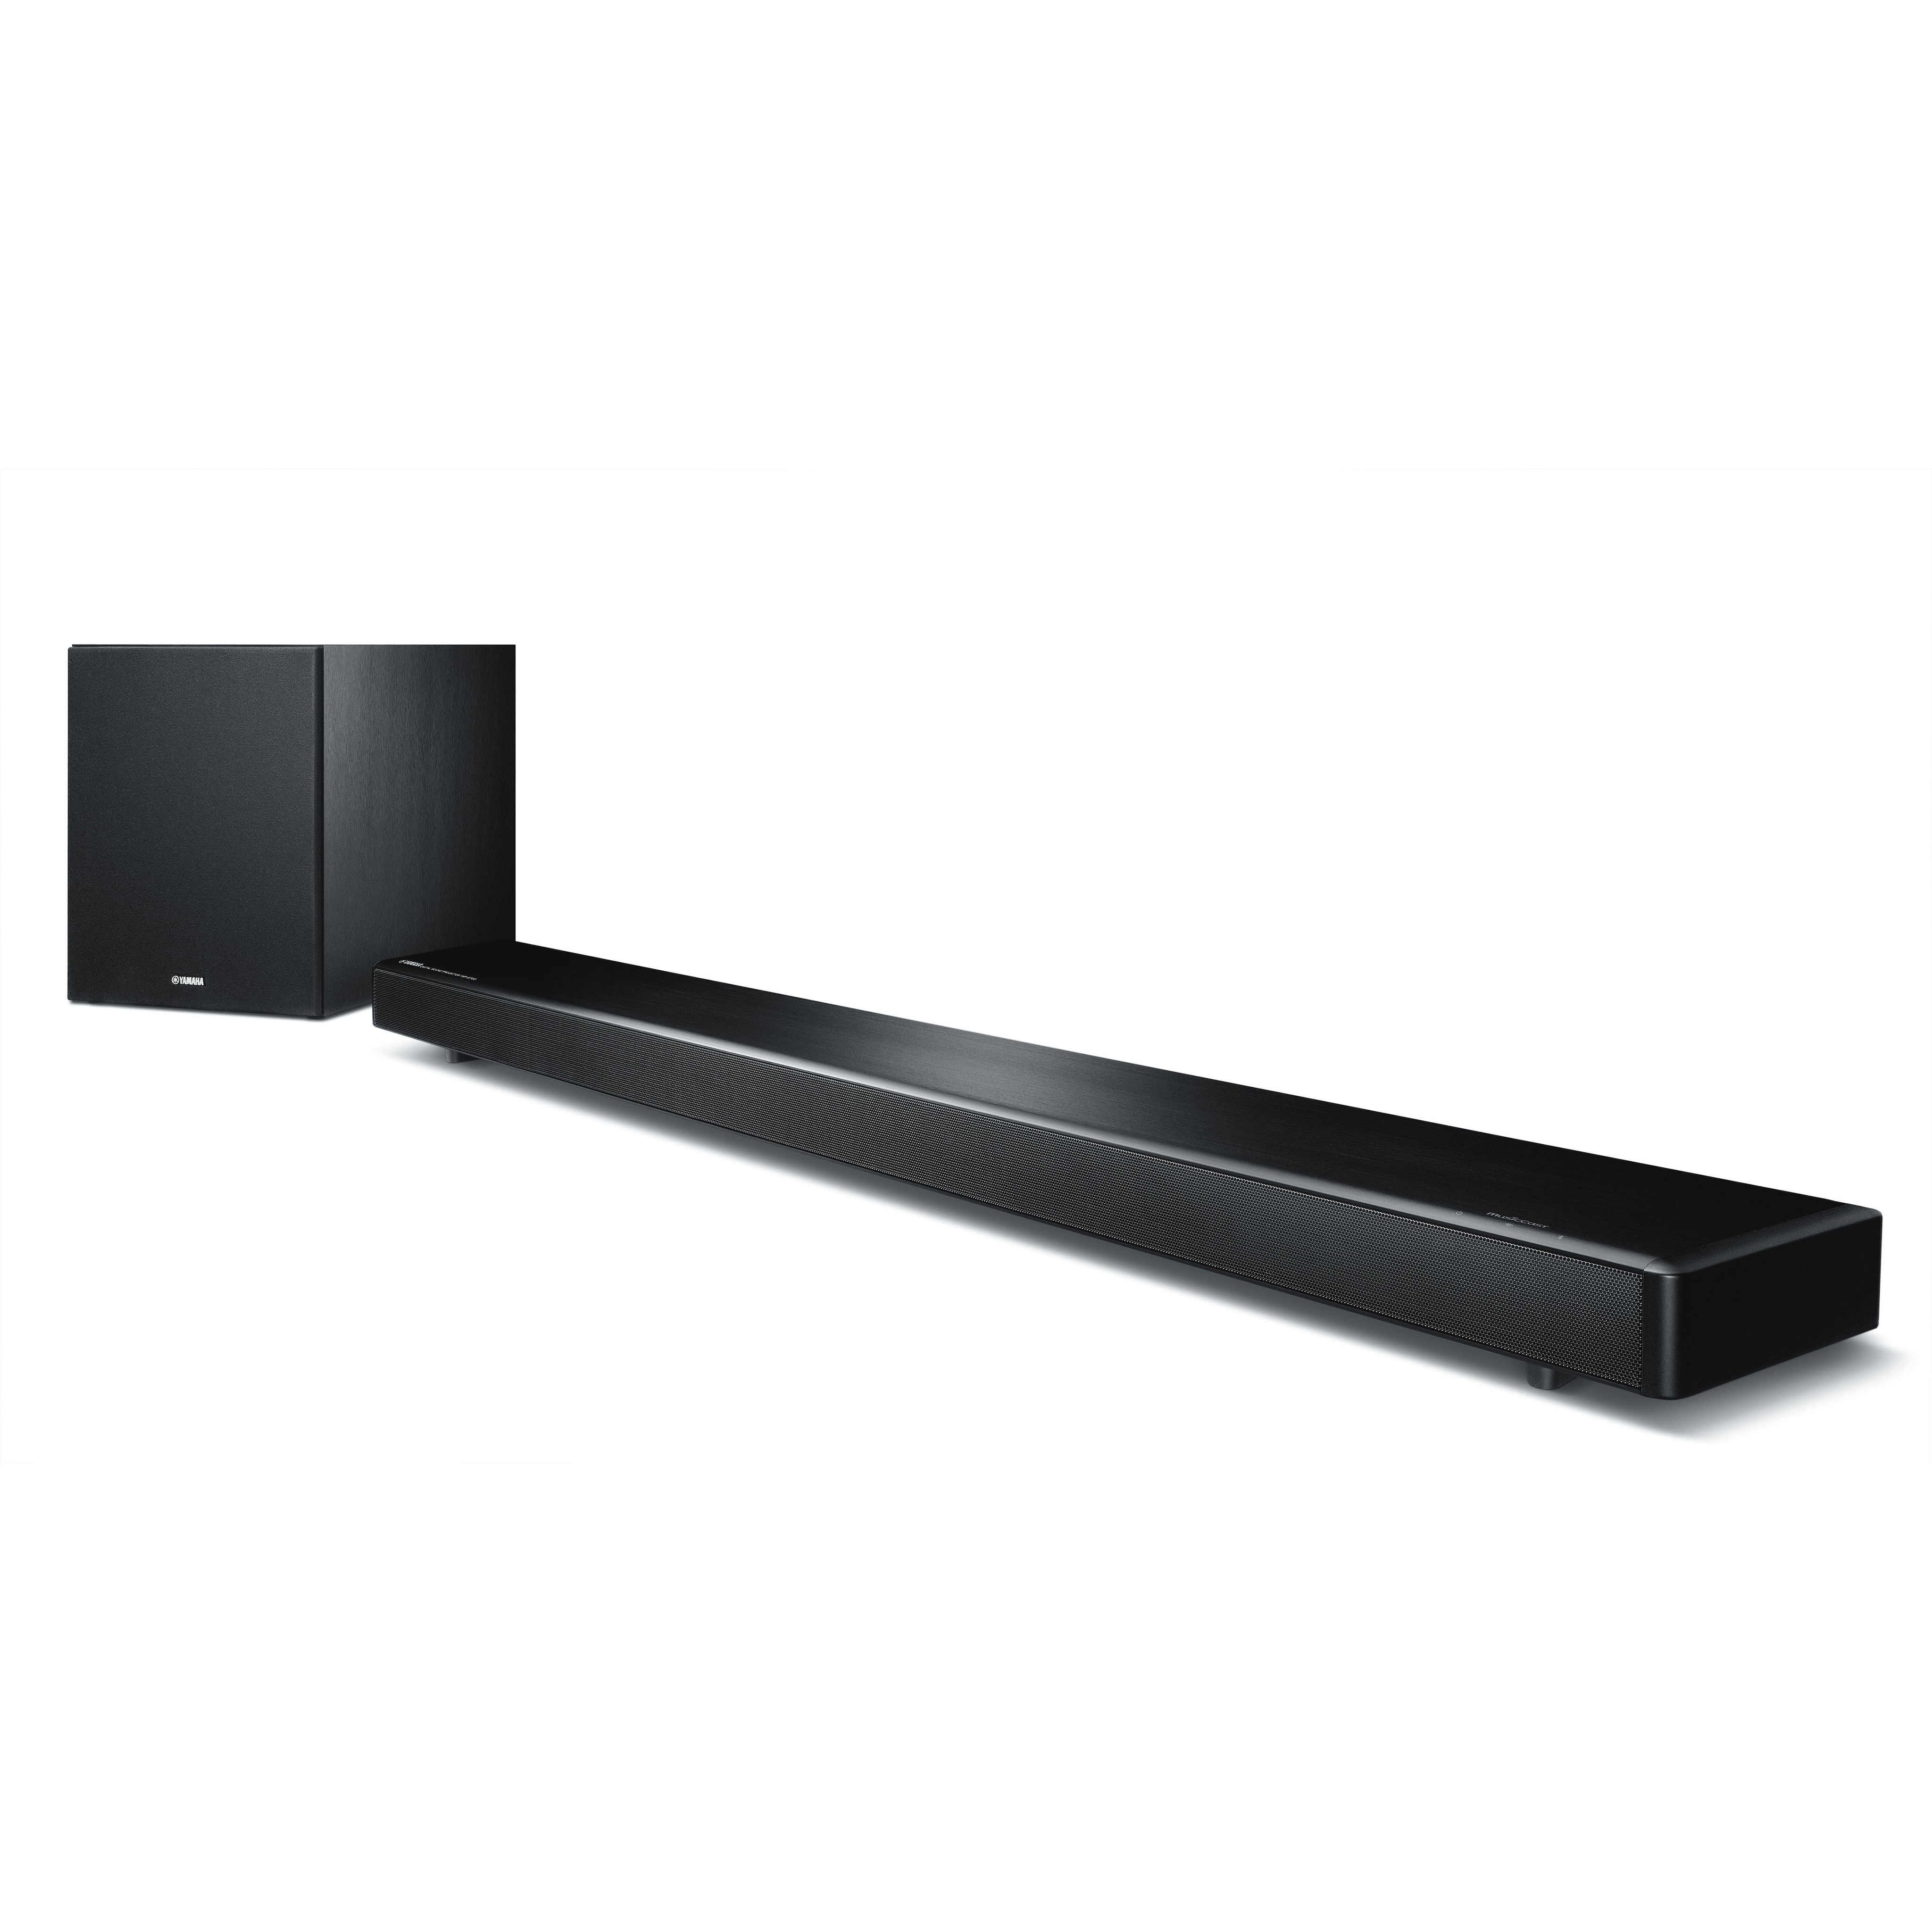 YSP-2700 - Overview - Sound Bar - Audio & Visual - Products 